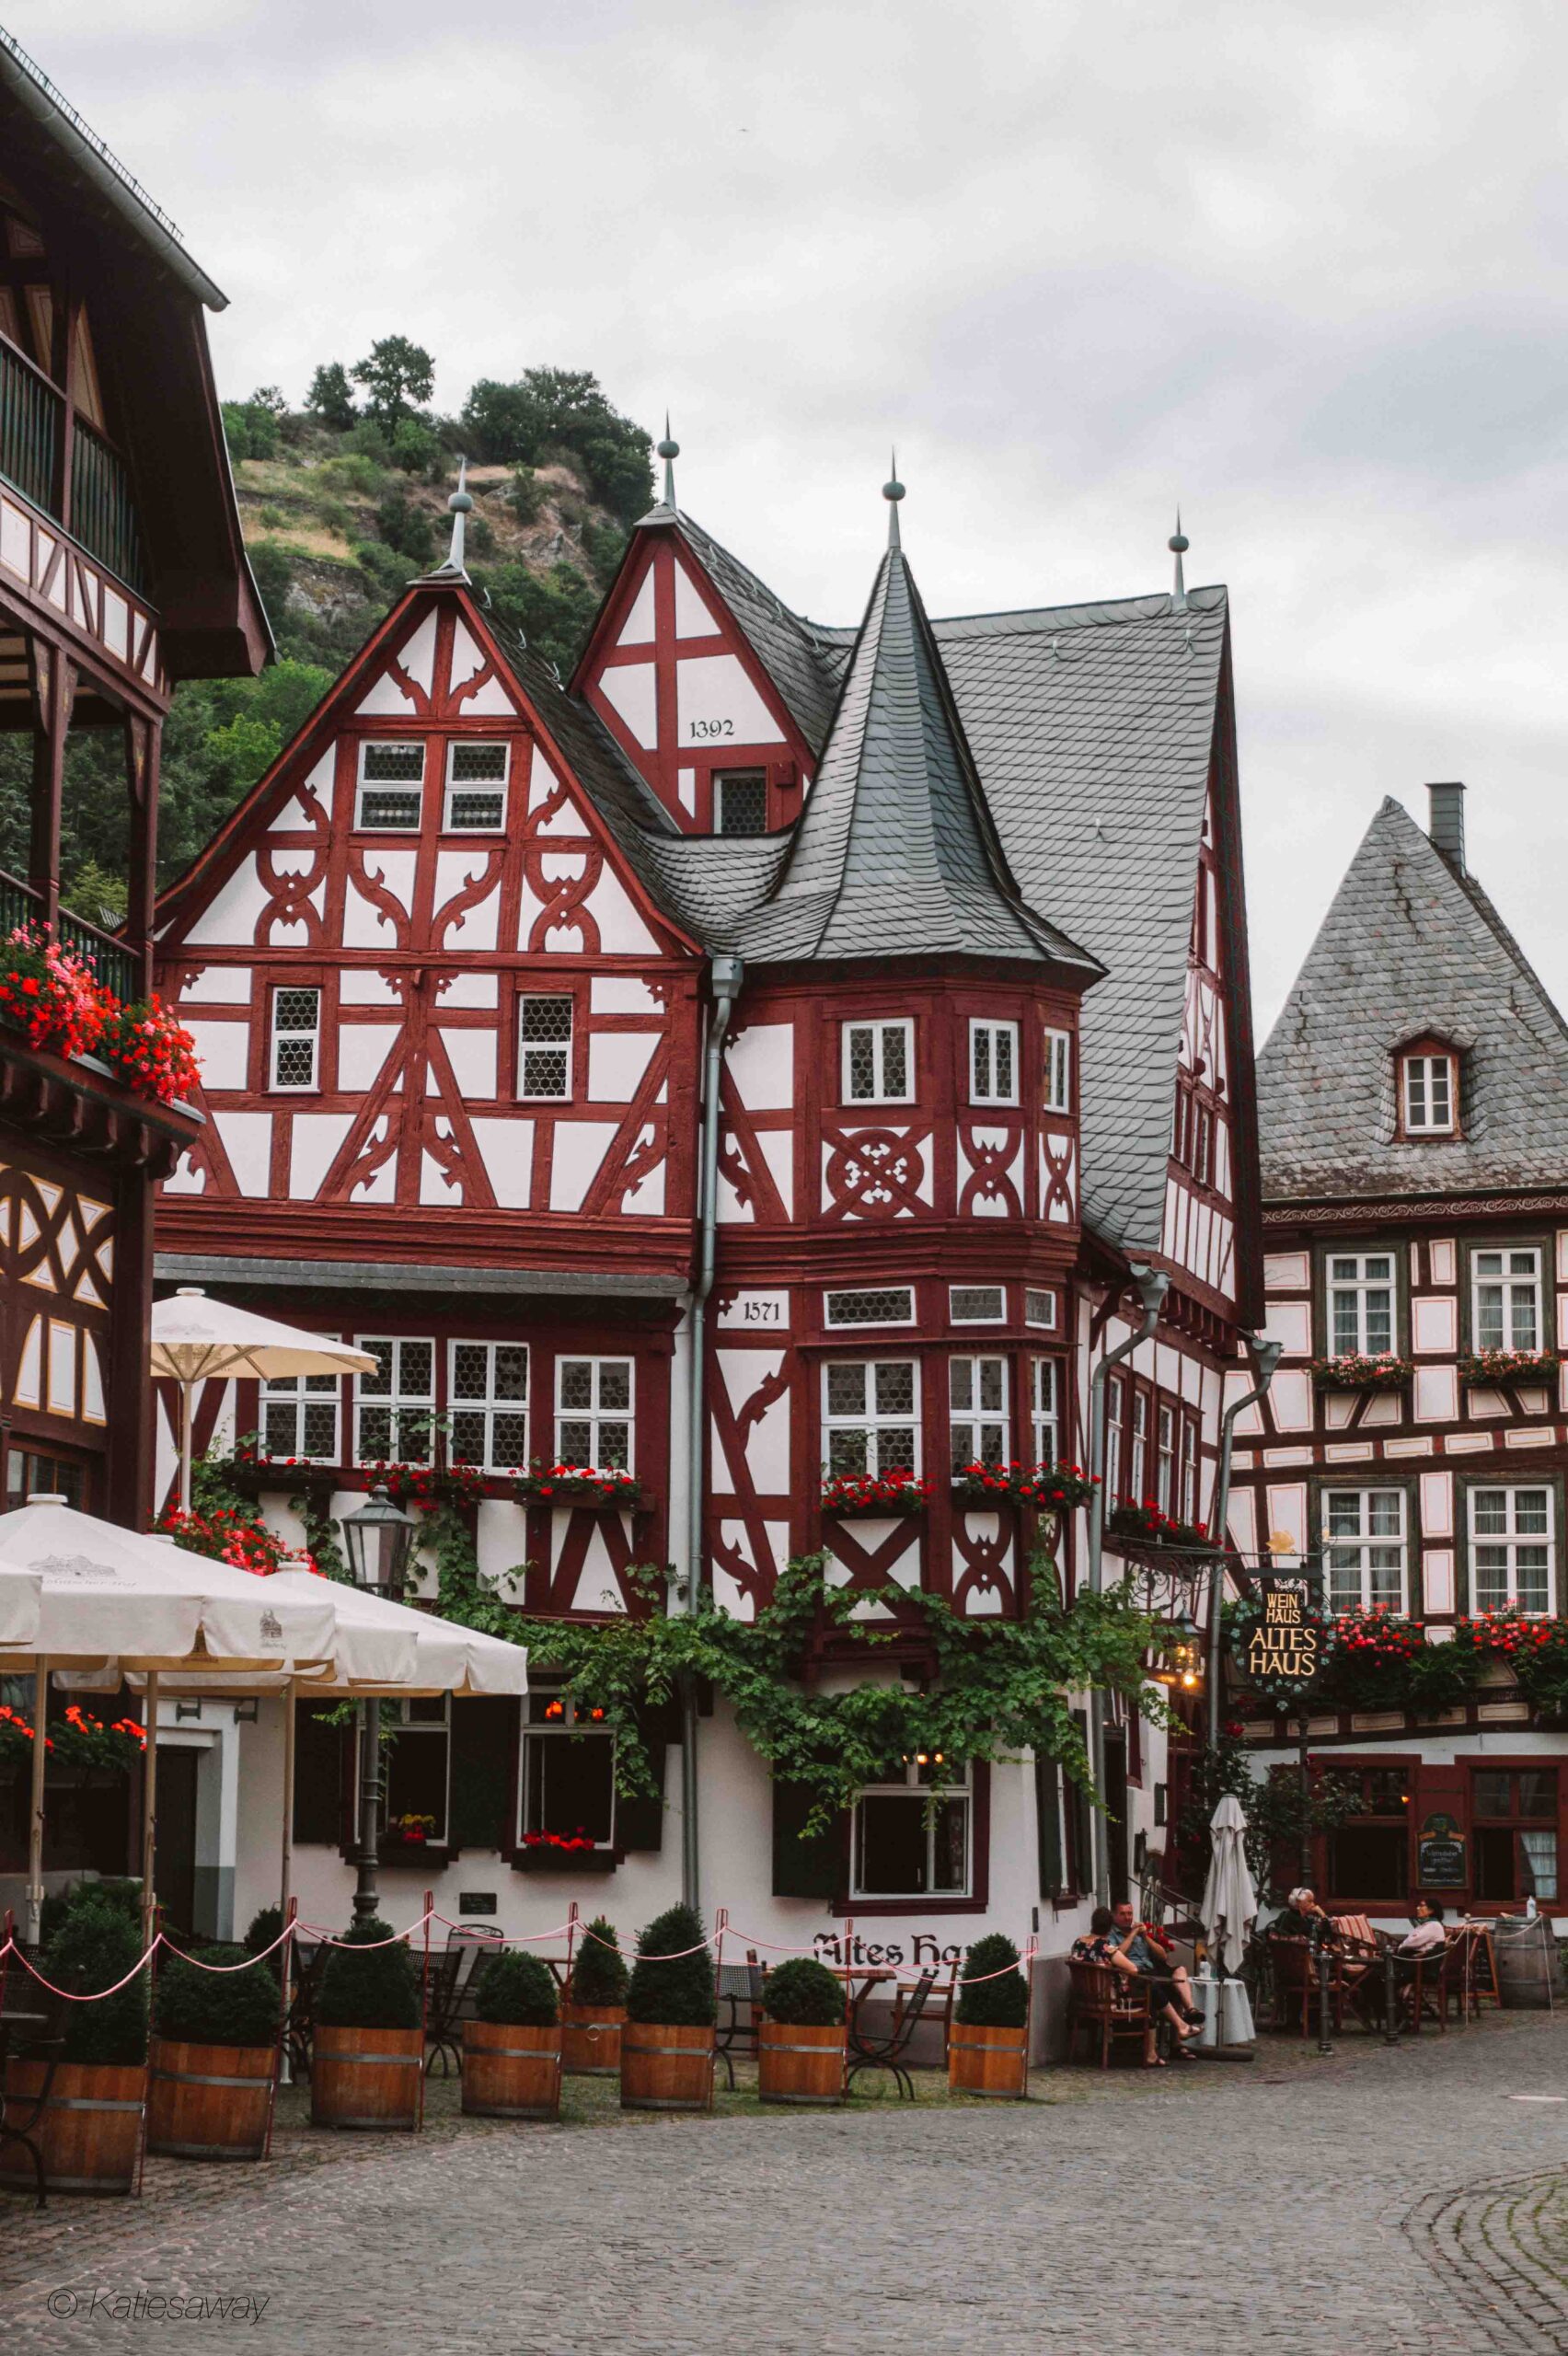 Altes Haus, Bacharach, germany